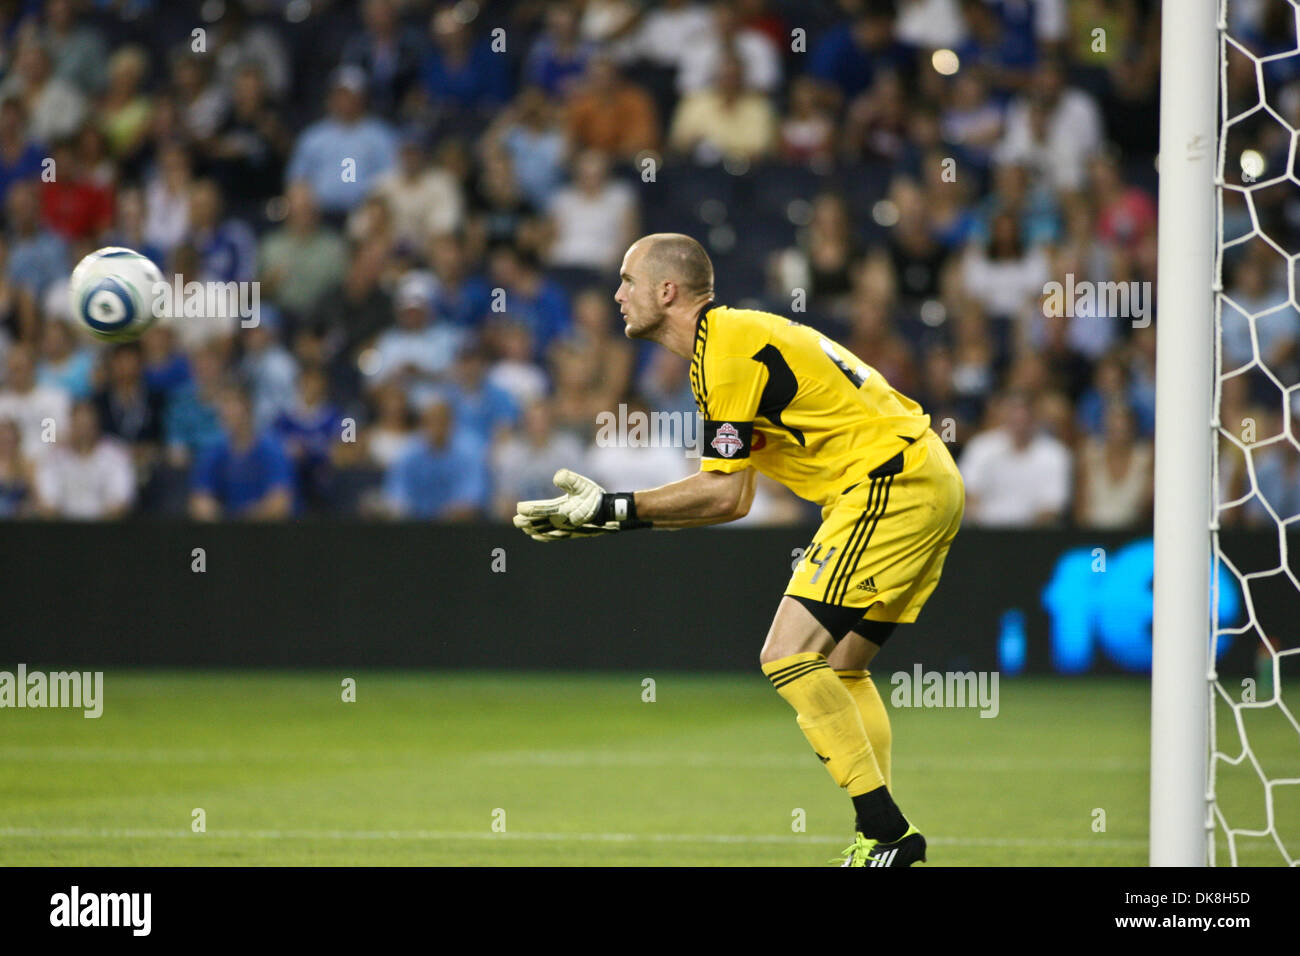 July 23, 2011 - Kansas City, Kansas, U.S - Toronto FC goalkeeper Stefan Frei (24) watches the ball and makes a save in the second half. Sporting KC defeated Toronto FC 4-2 at LIVESTRONG Sporting Park in Kansas City, Kansas. (Credit Image: © Tyson Hofsommer/Southcreek Global/ZUMAPRESS.com) Stock Photo